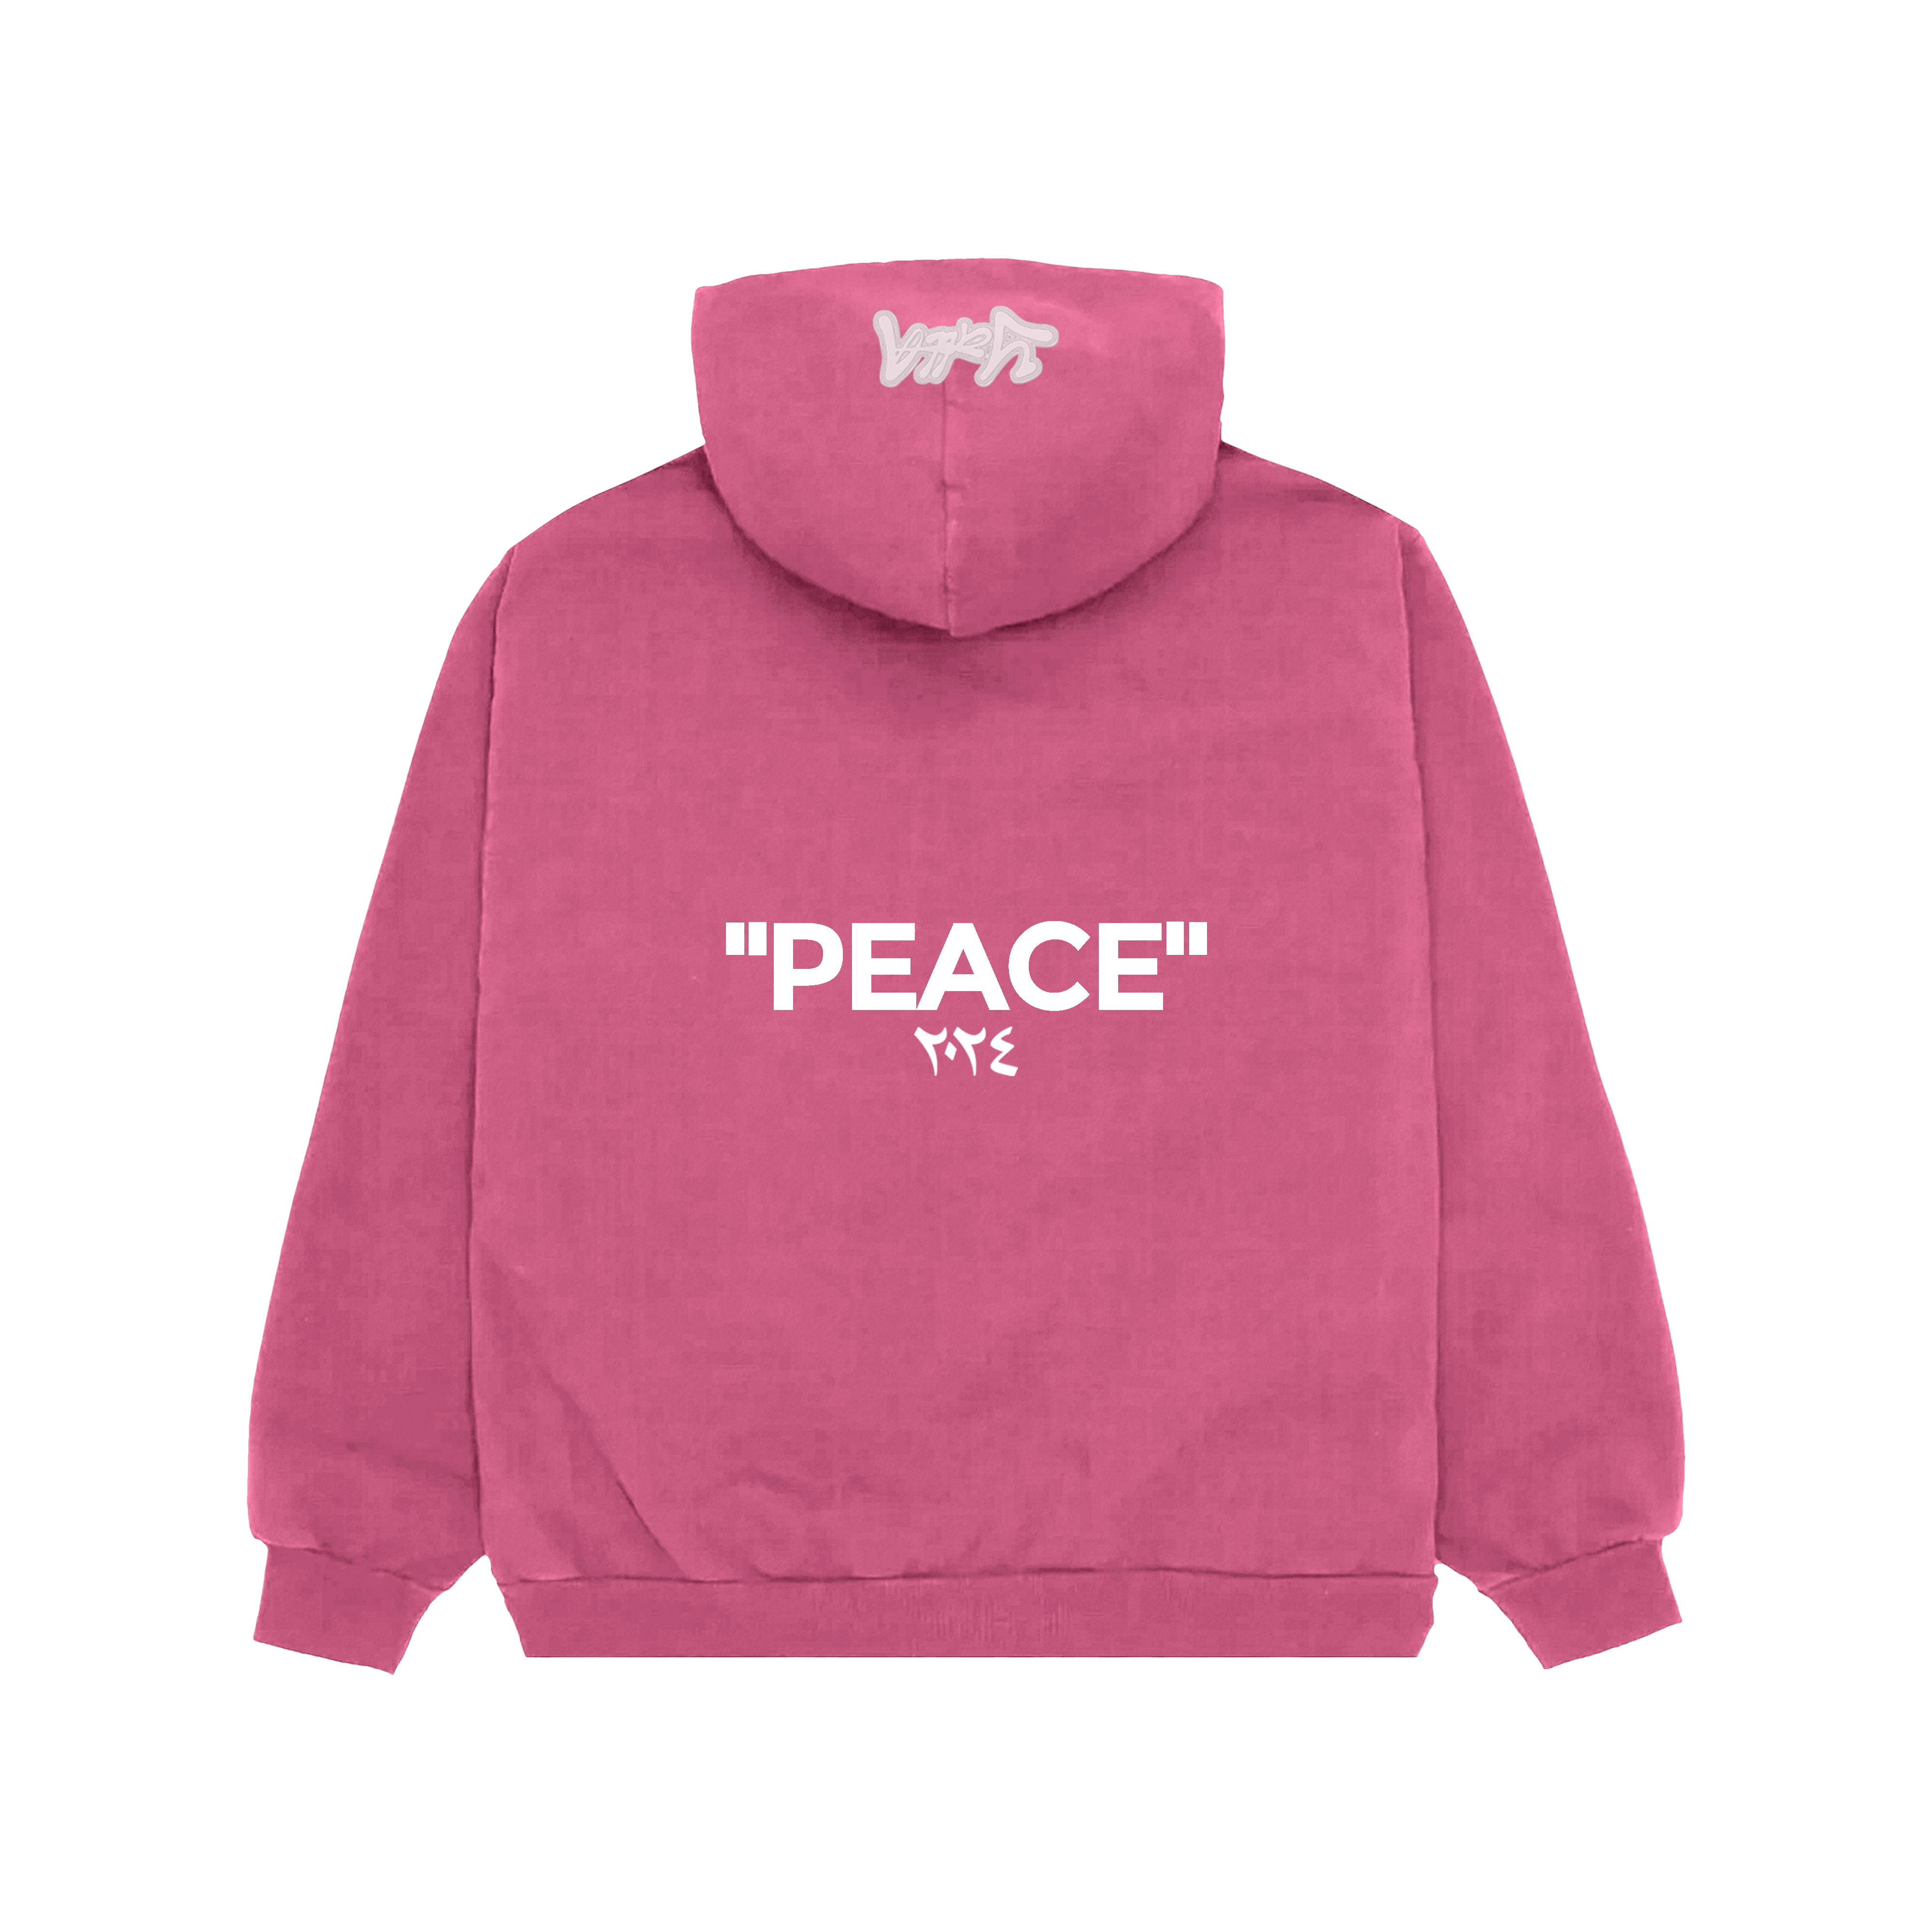 Peace Pink